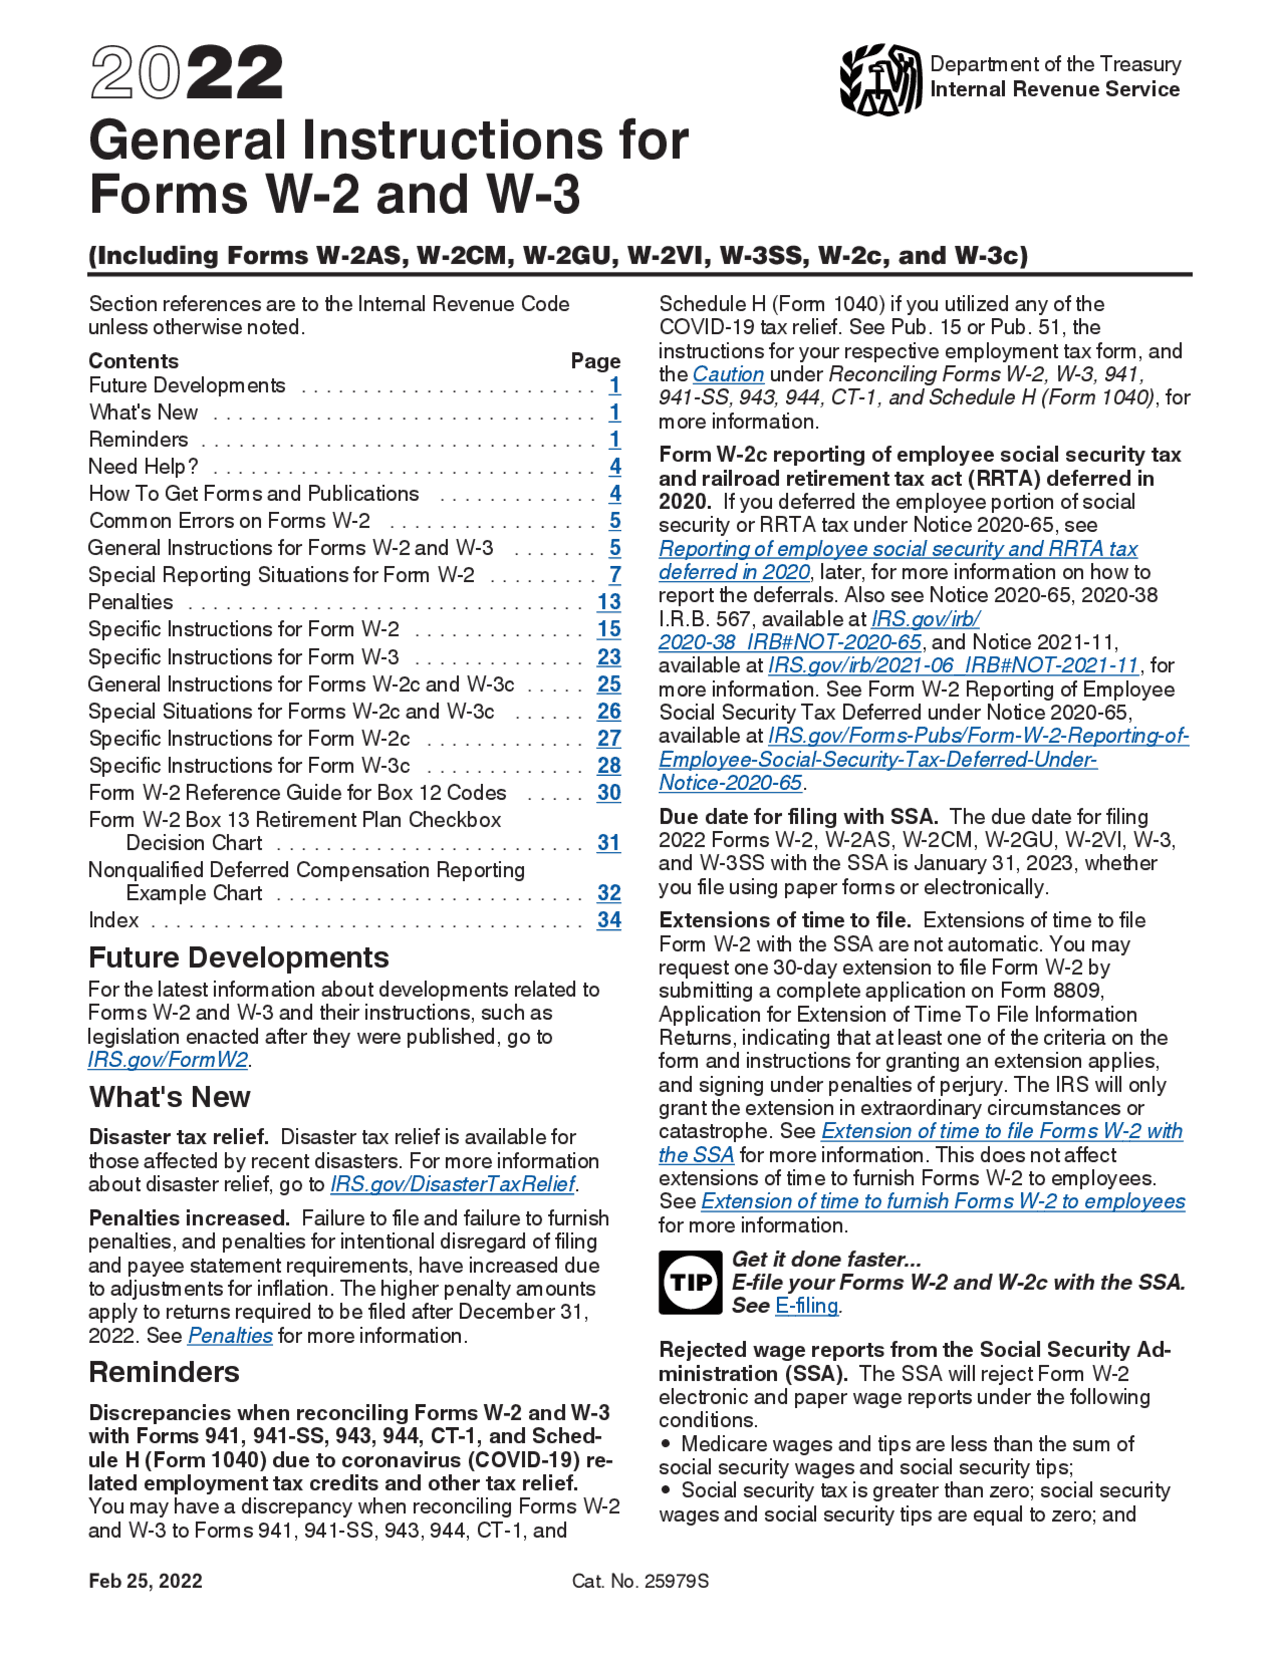 2022 General Instructions For Forms W-2 And W-3 | Lecture Notes pertaining to W2 Form Instructions 2022